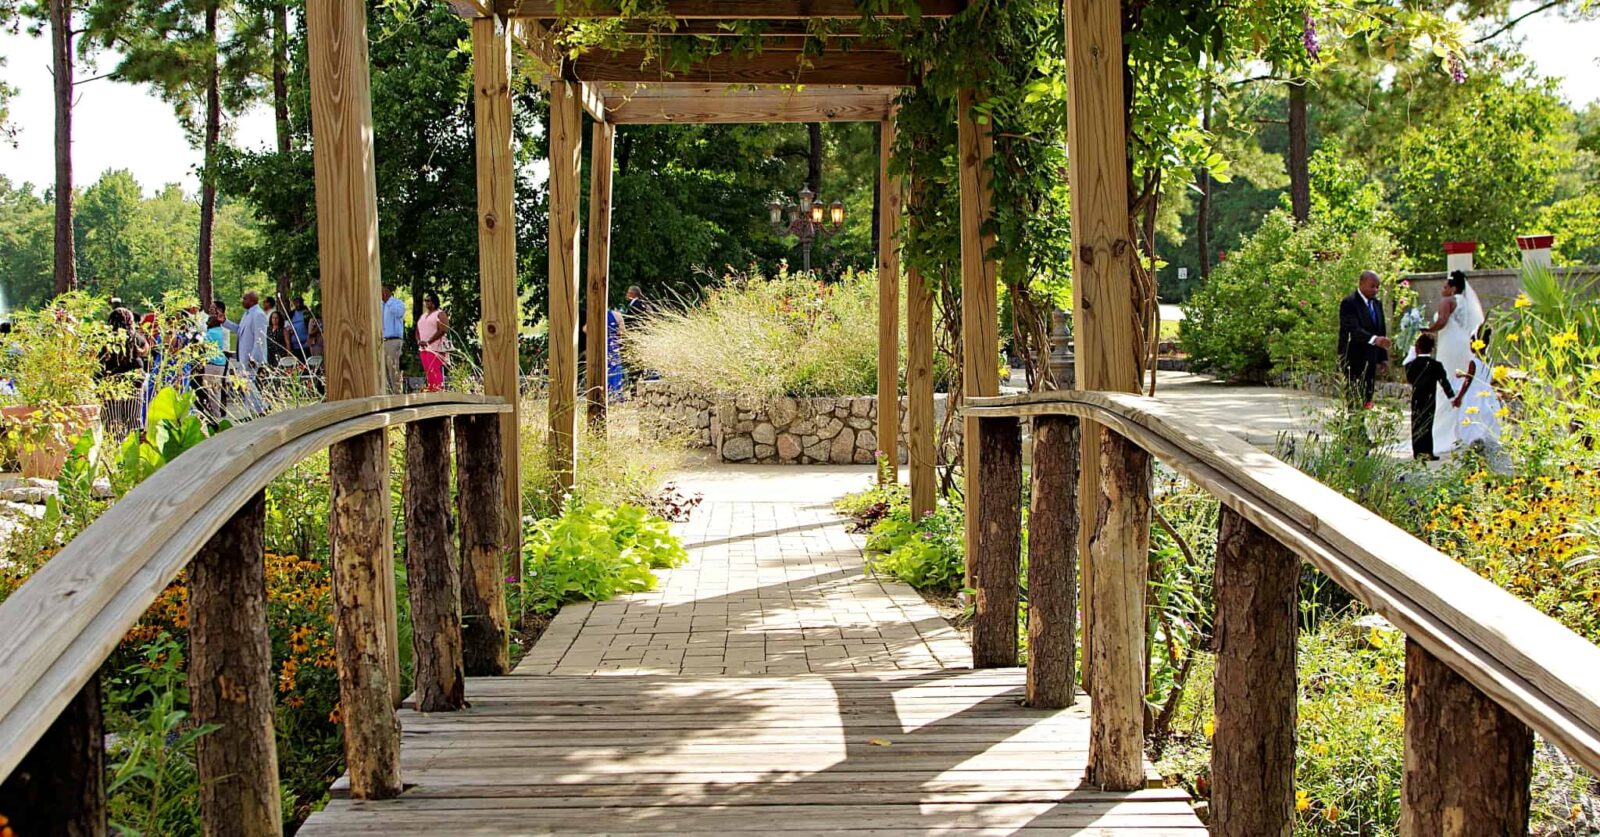 A wooden walkway with an arbor and bench.